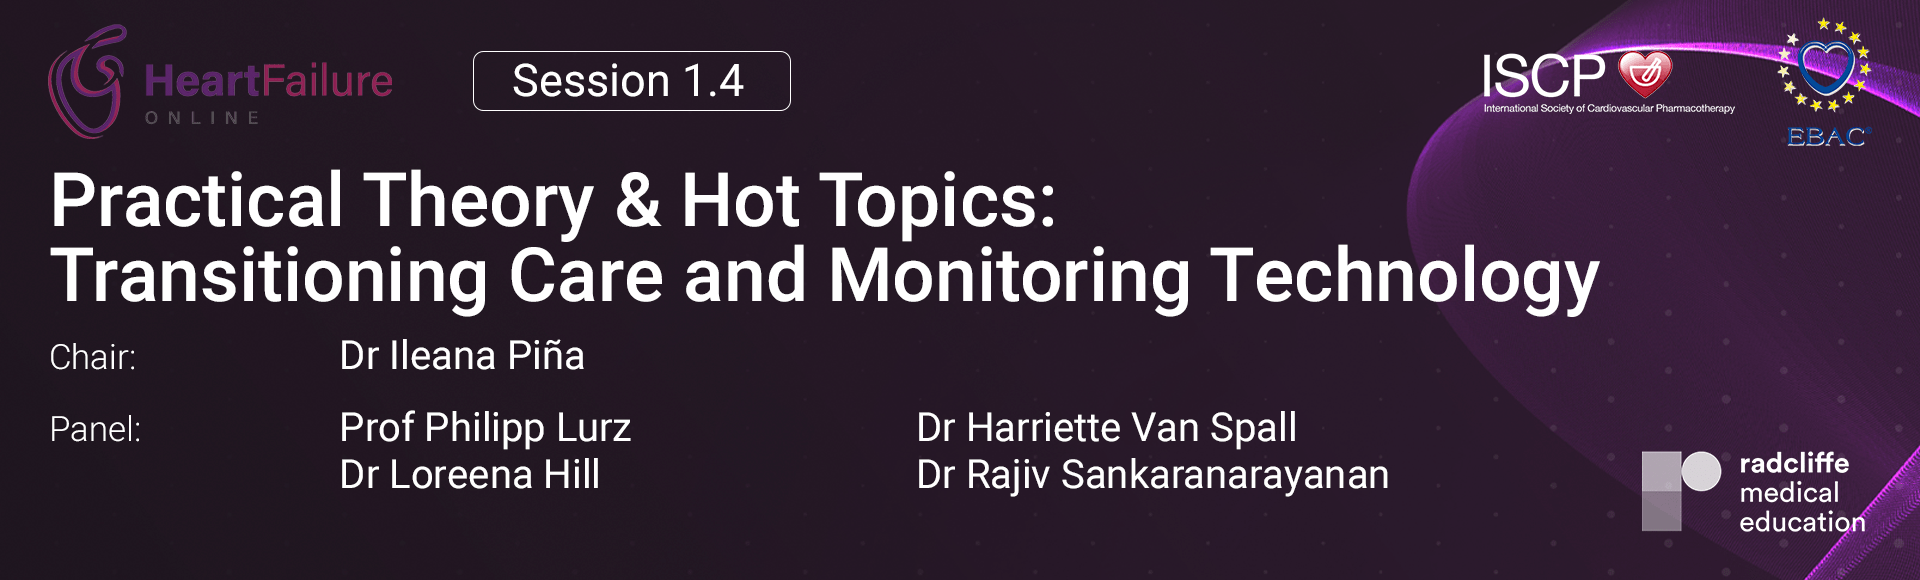 HFO 2022 - Session 1.4 Practical Theory & Hot Topics: Transitioning Care and Monitoring Technology